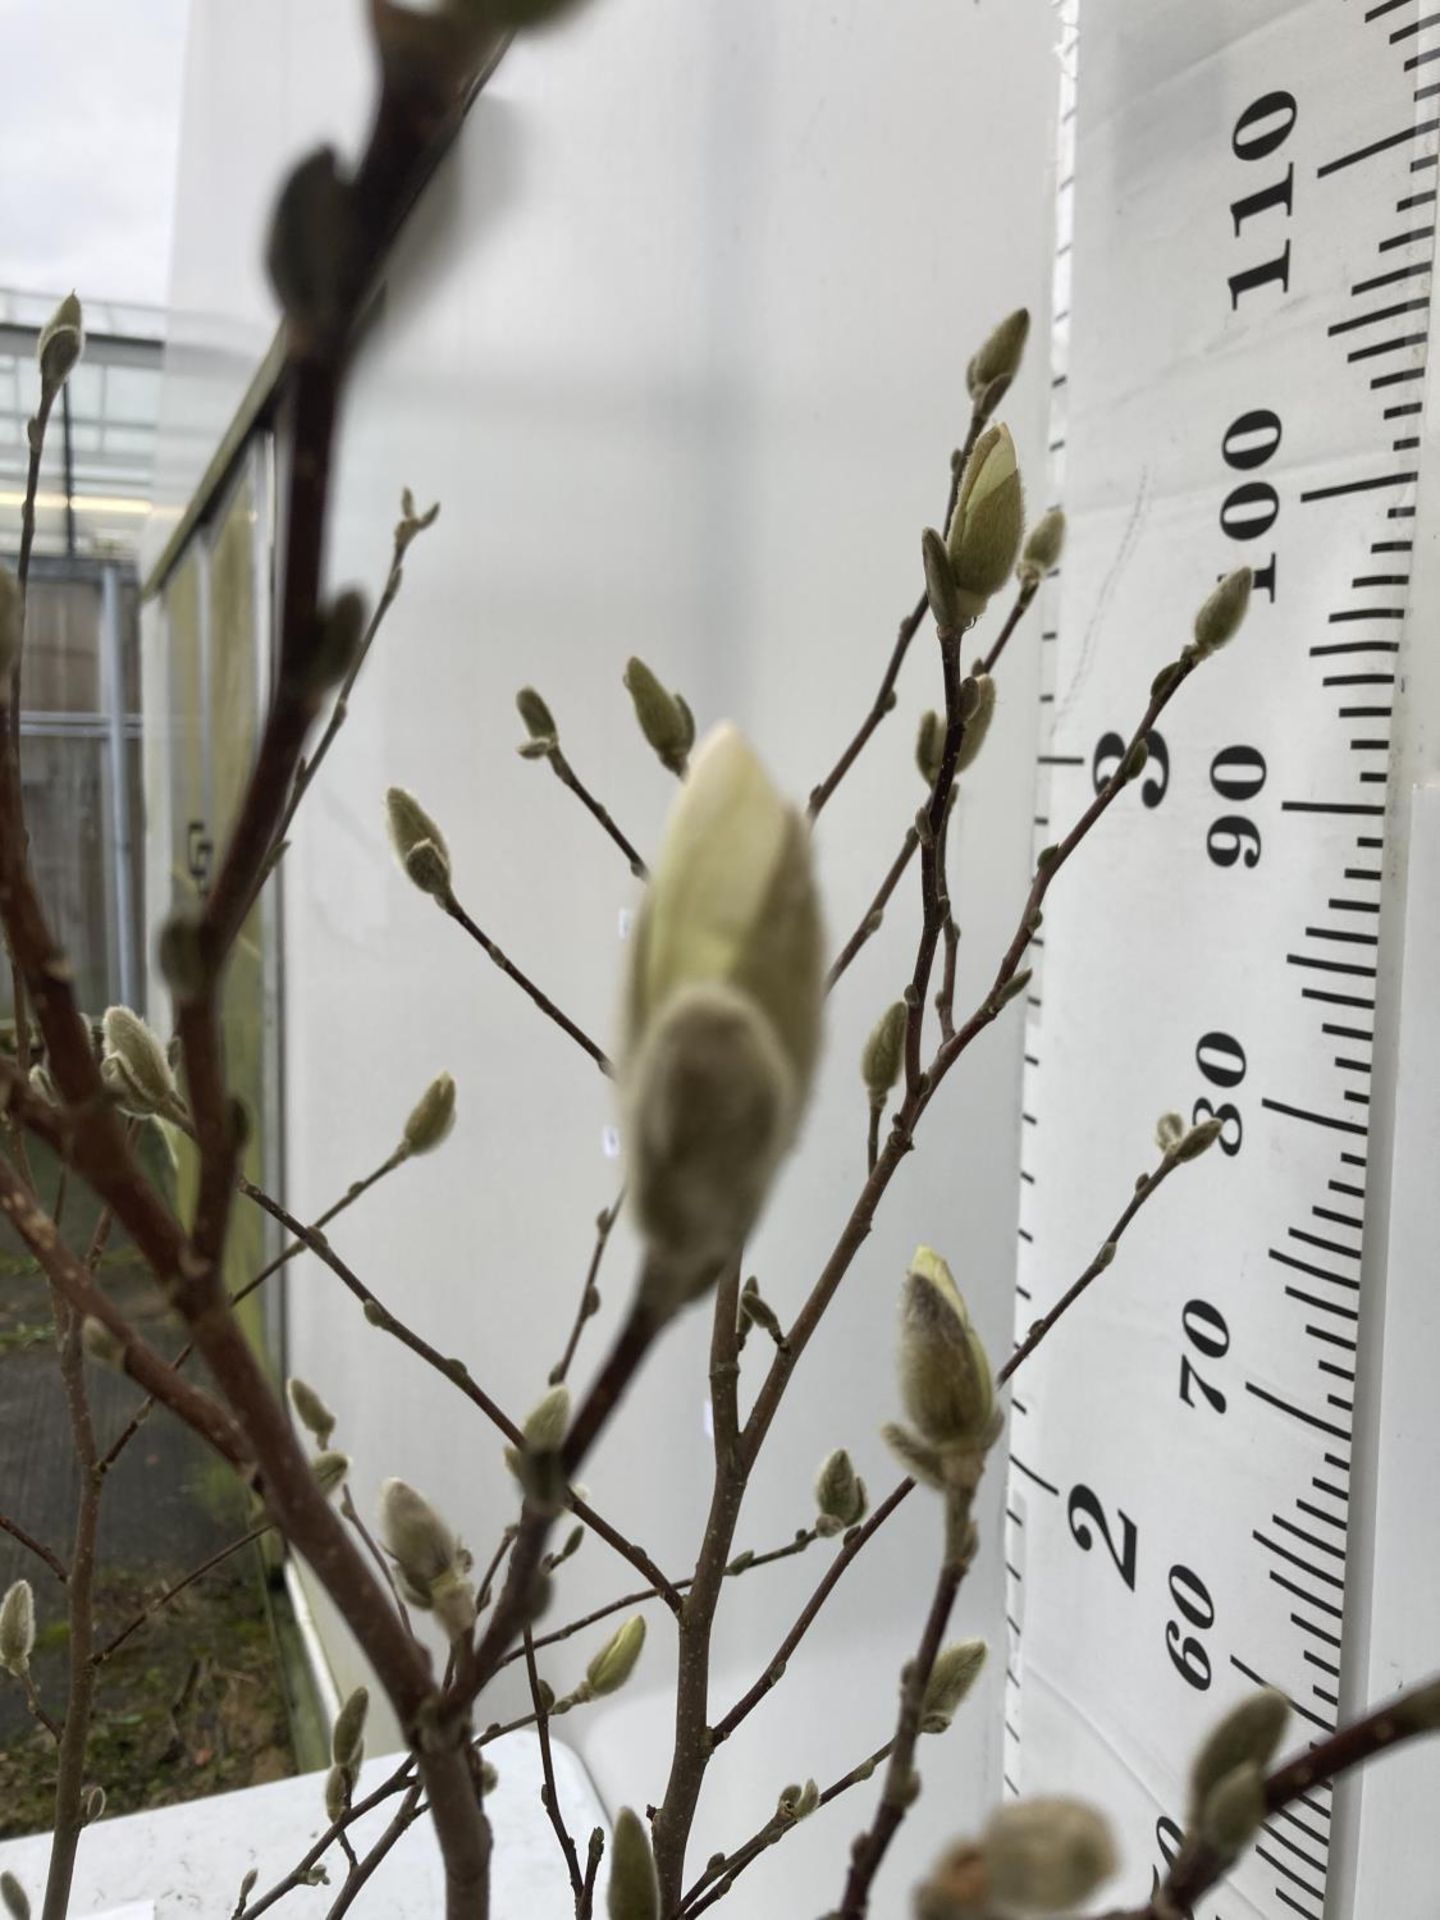 ONE MAGNOLIA STELLATA 'ROYAL STAR' APPROX 110CM IN HEIGHT IN A 7 LTR POT PLUS VAT - Image 3 of 3